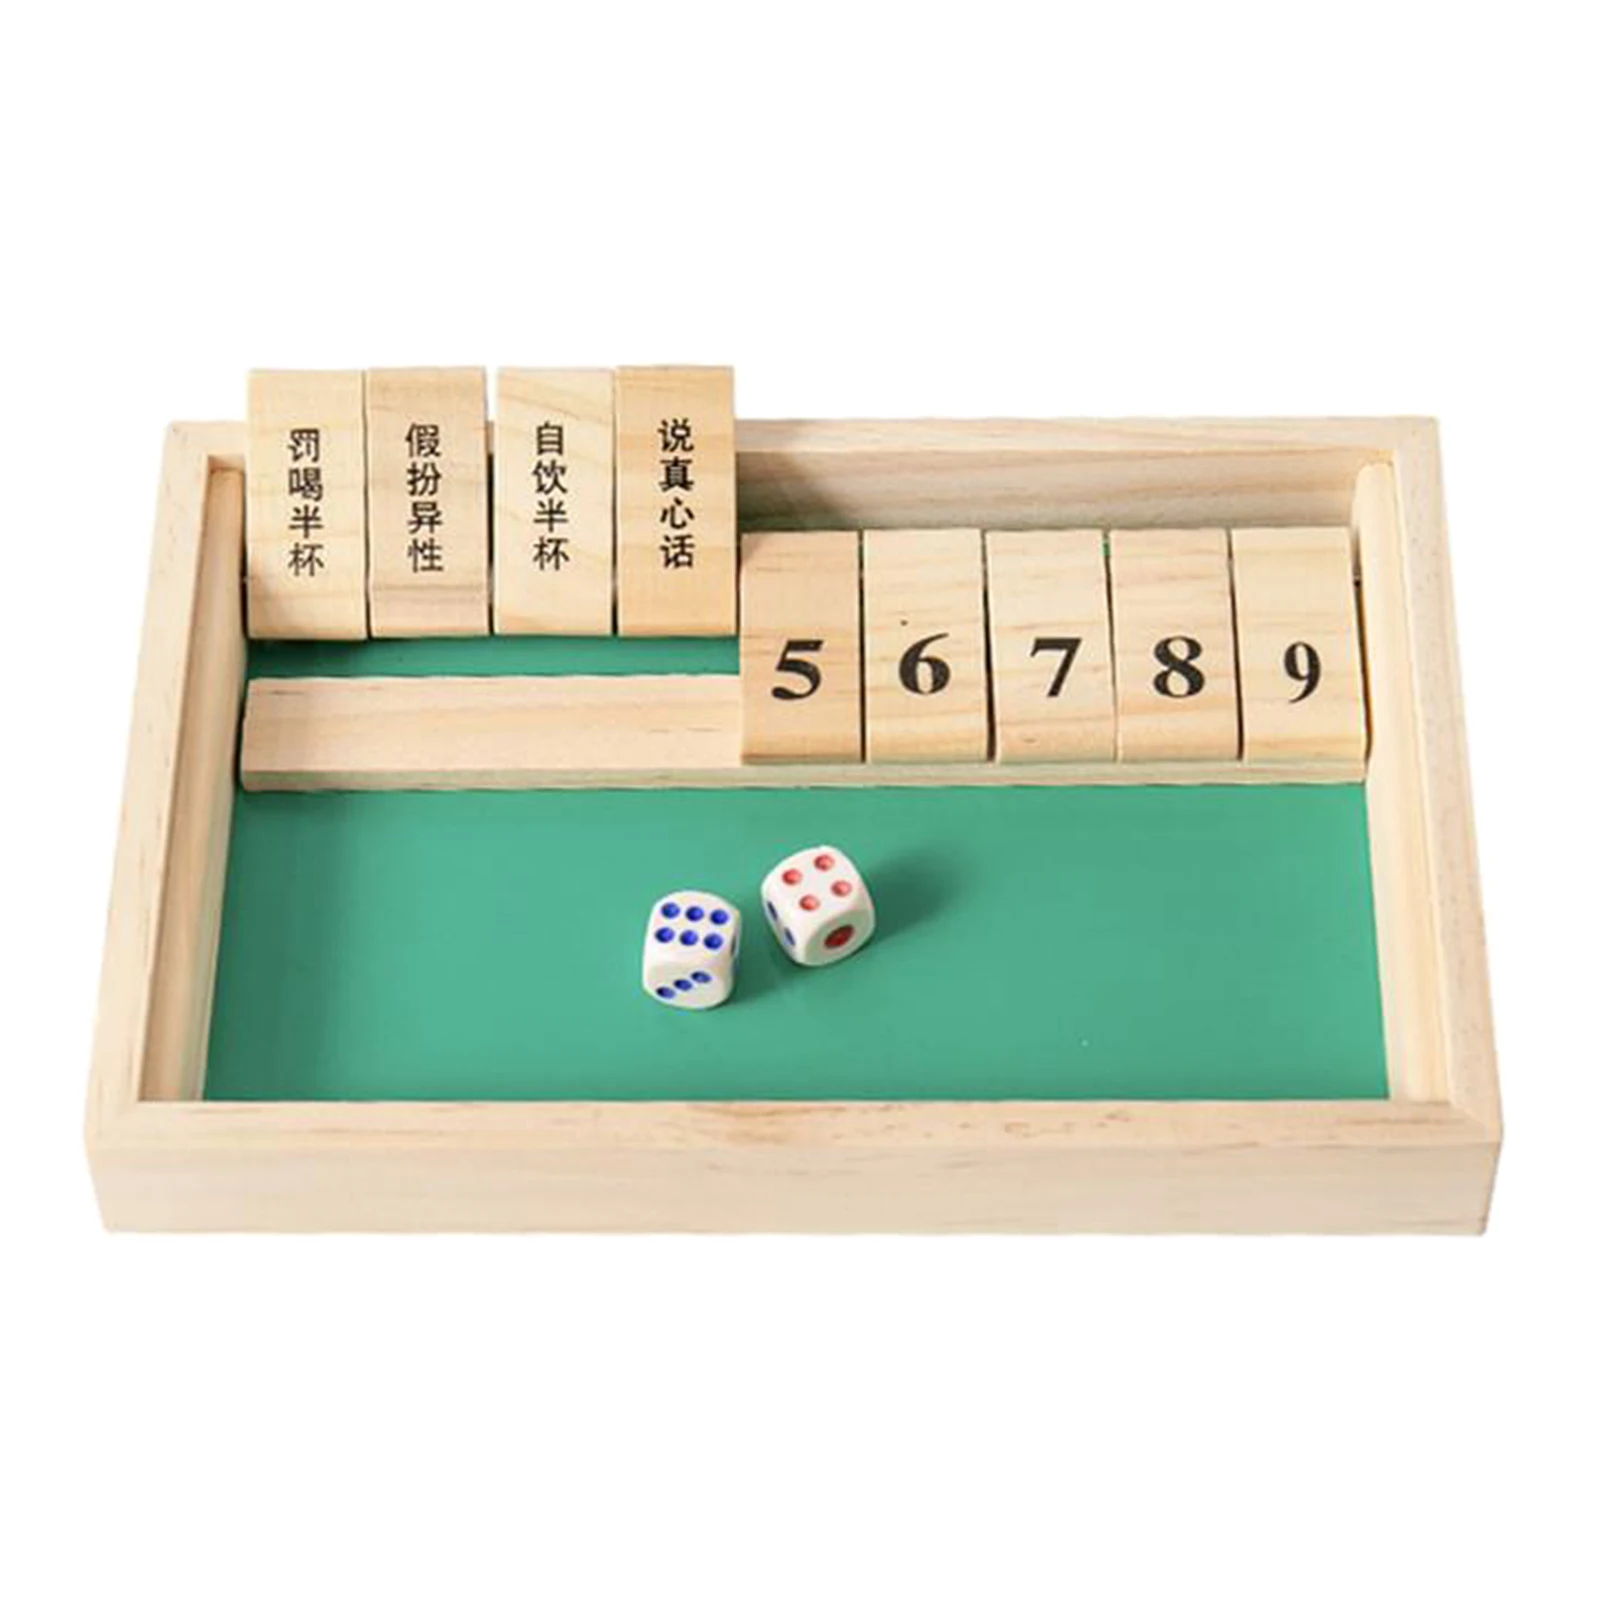 

Wood Shut The Box 9 Numbers Dice Friends Bar Toys 1-2 Player Fun Table Games